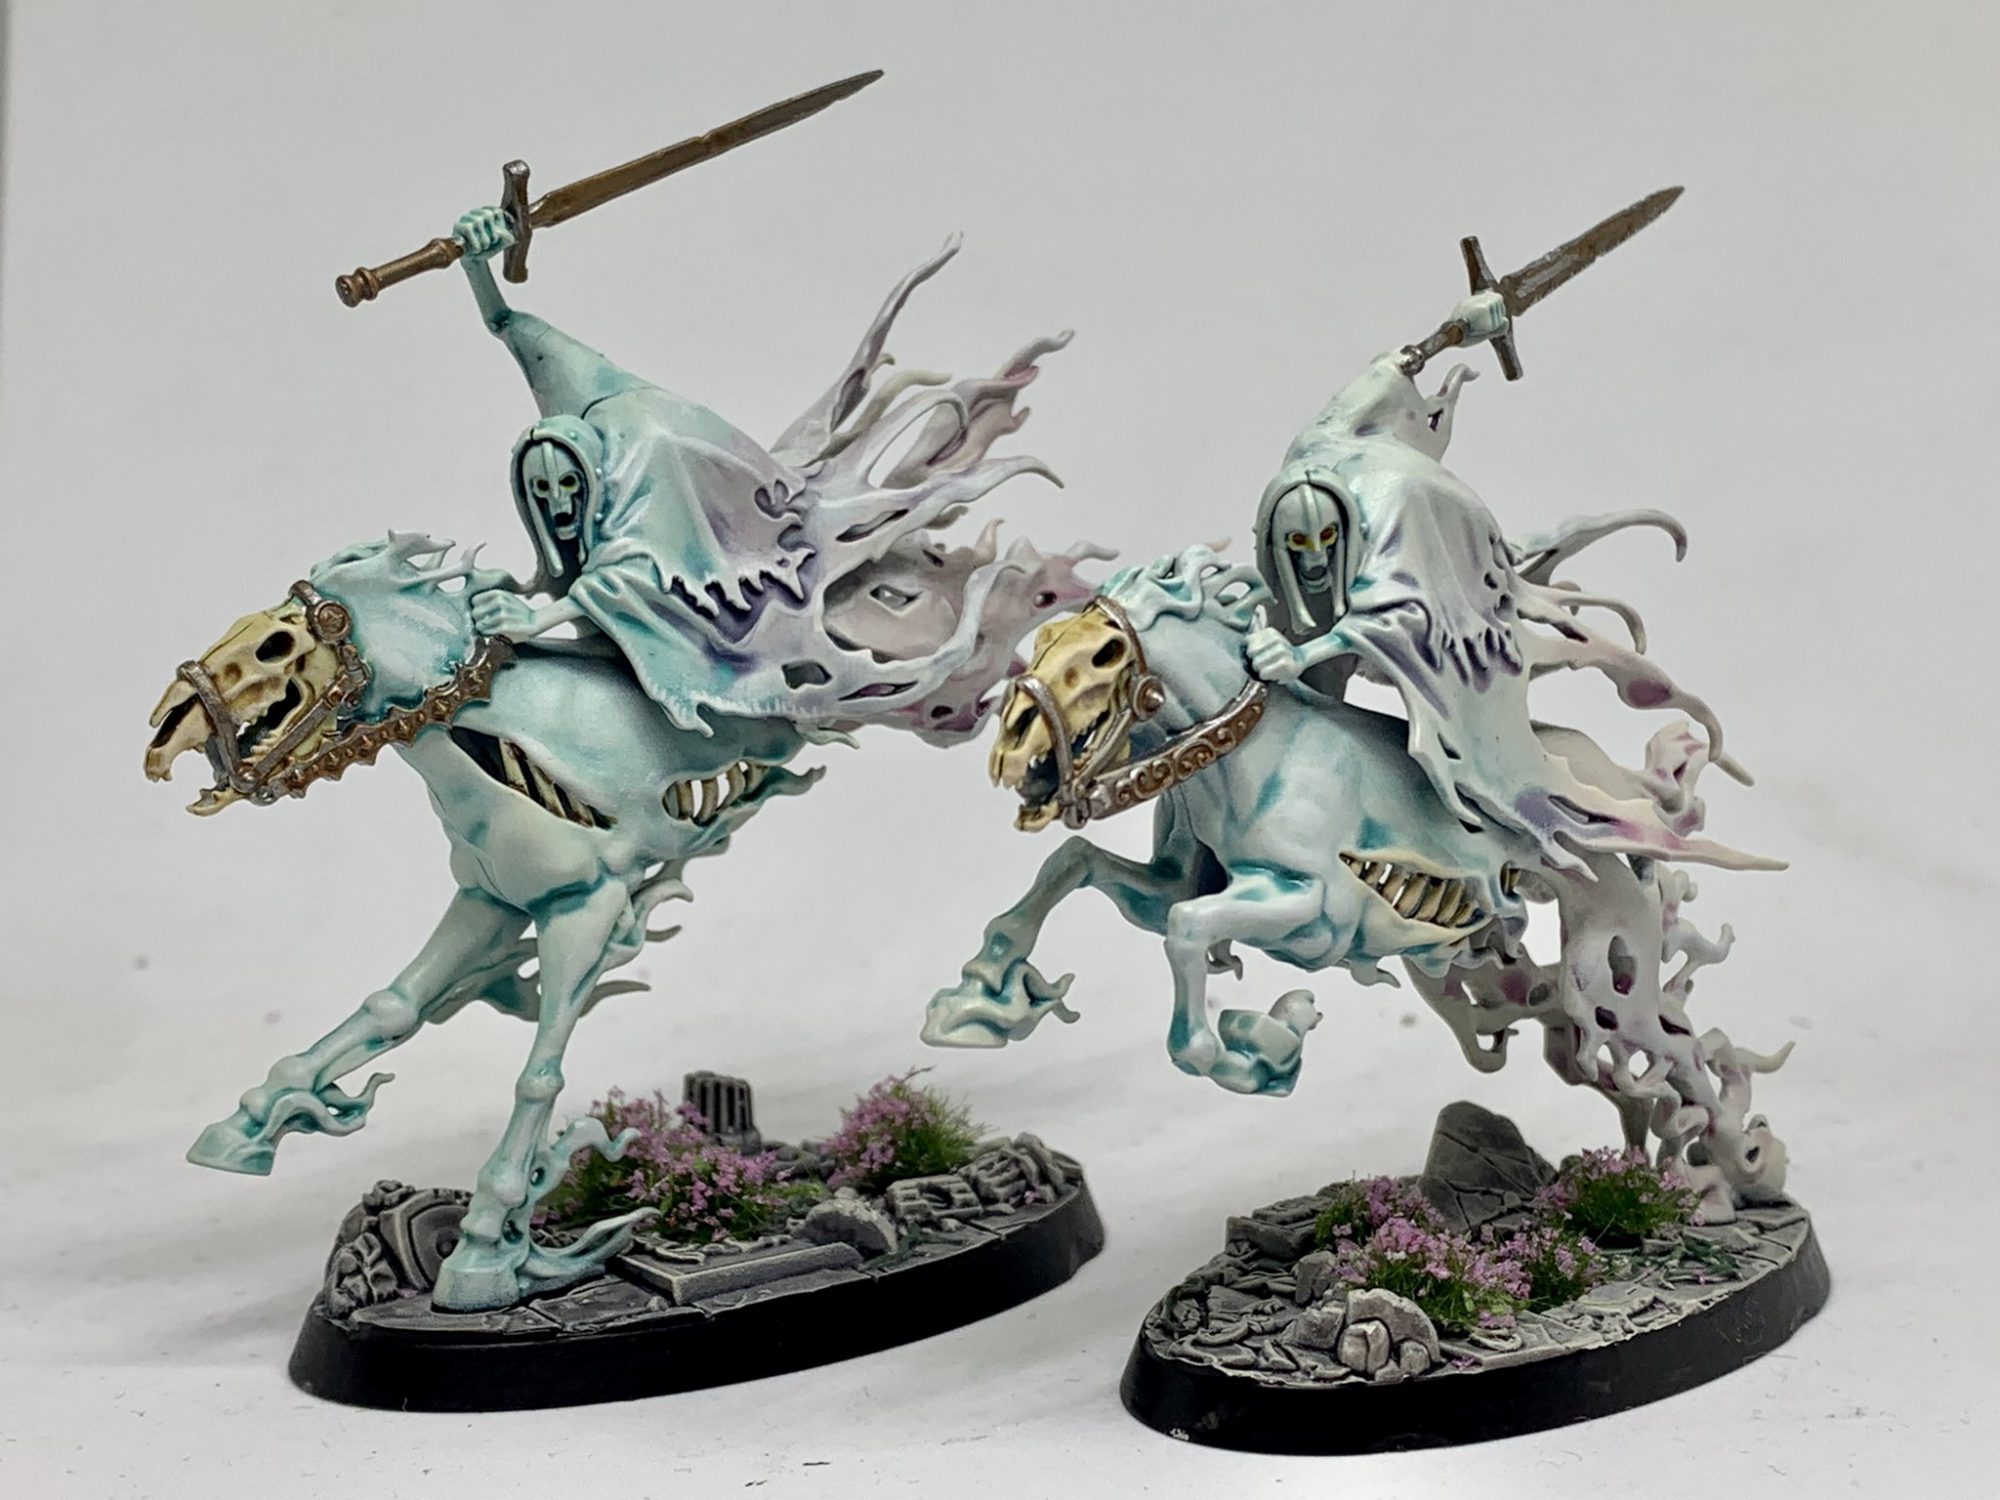 Nighthaunt. Spectral knights atop ethereal steeds.